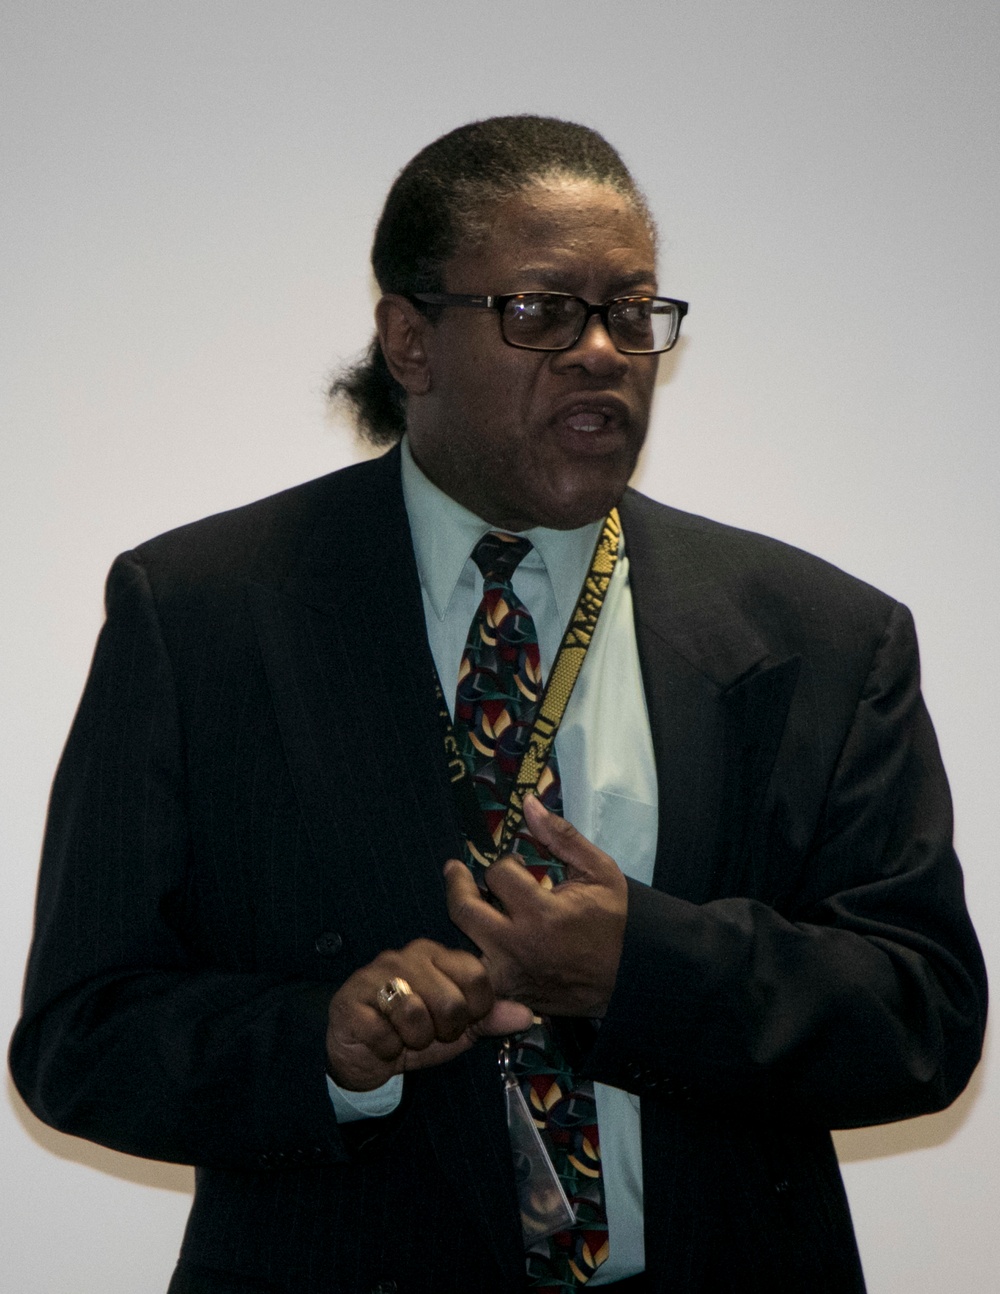 Dr. Andrew Jackson hosts a Buffalo District lunch-and-learn presentation on institutional racism